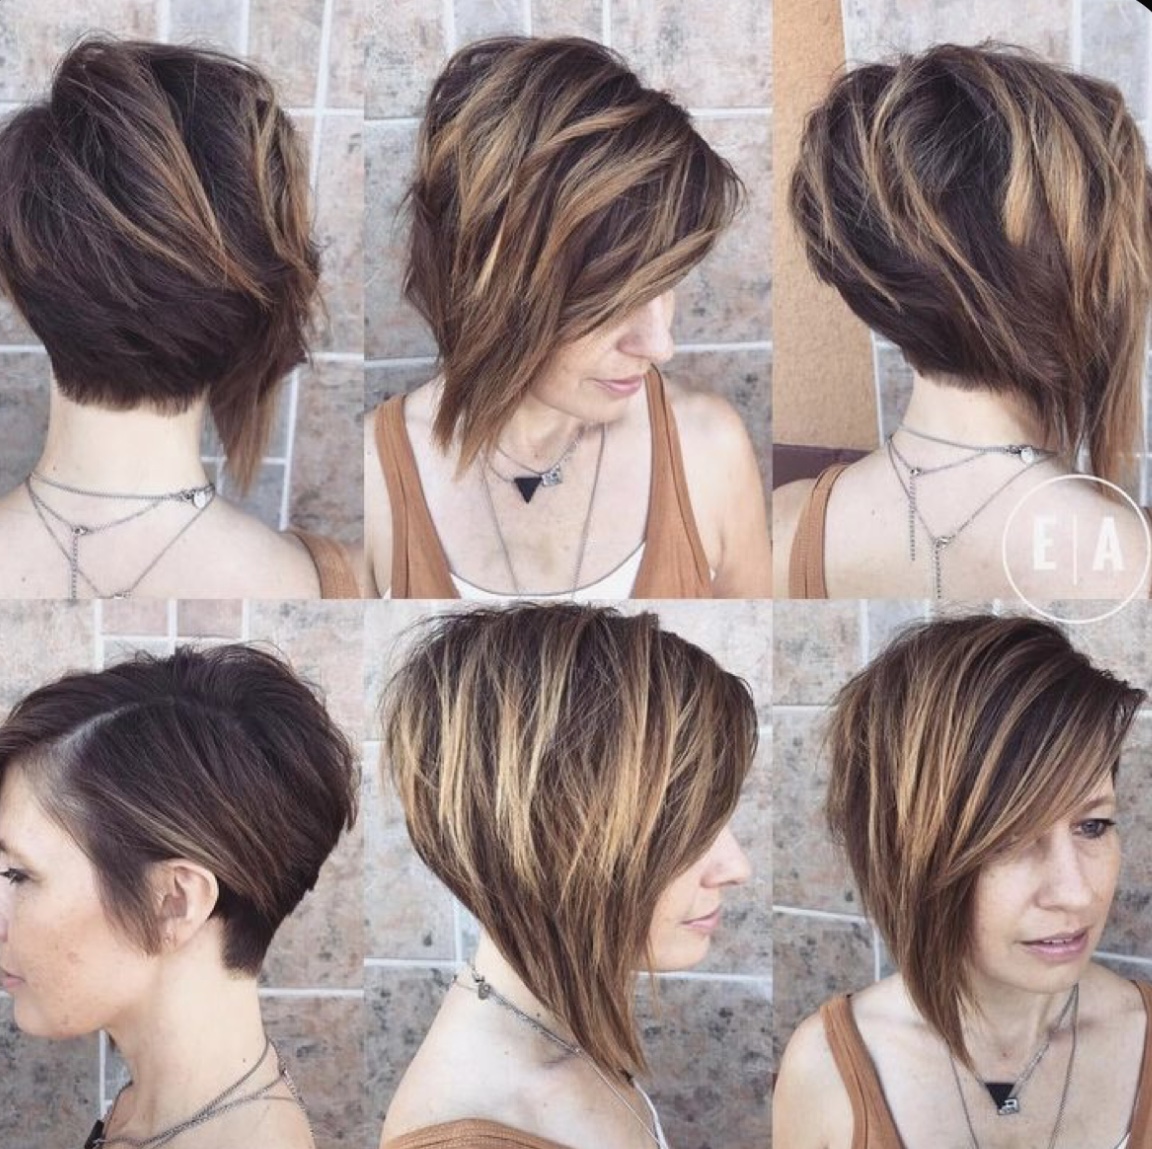 How To Cut A Long Inverted Bob